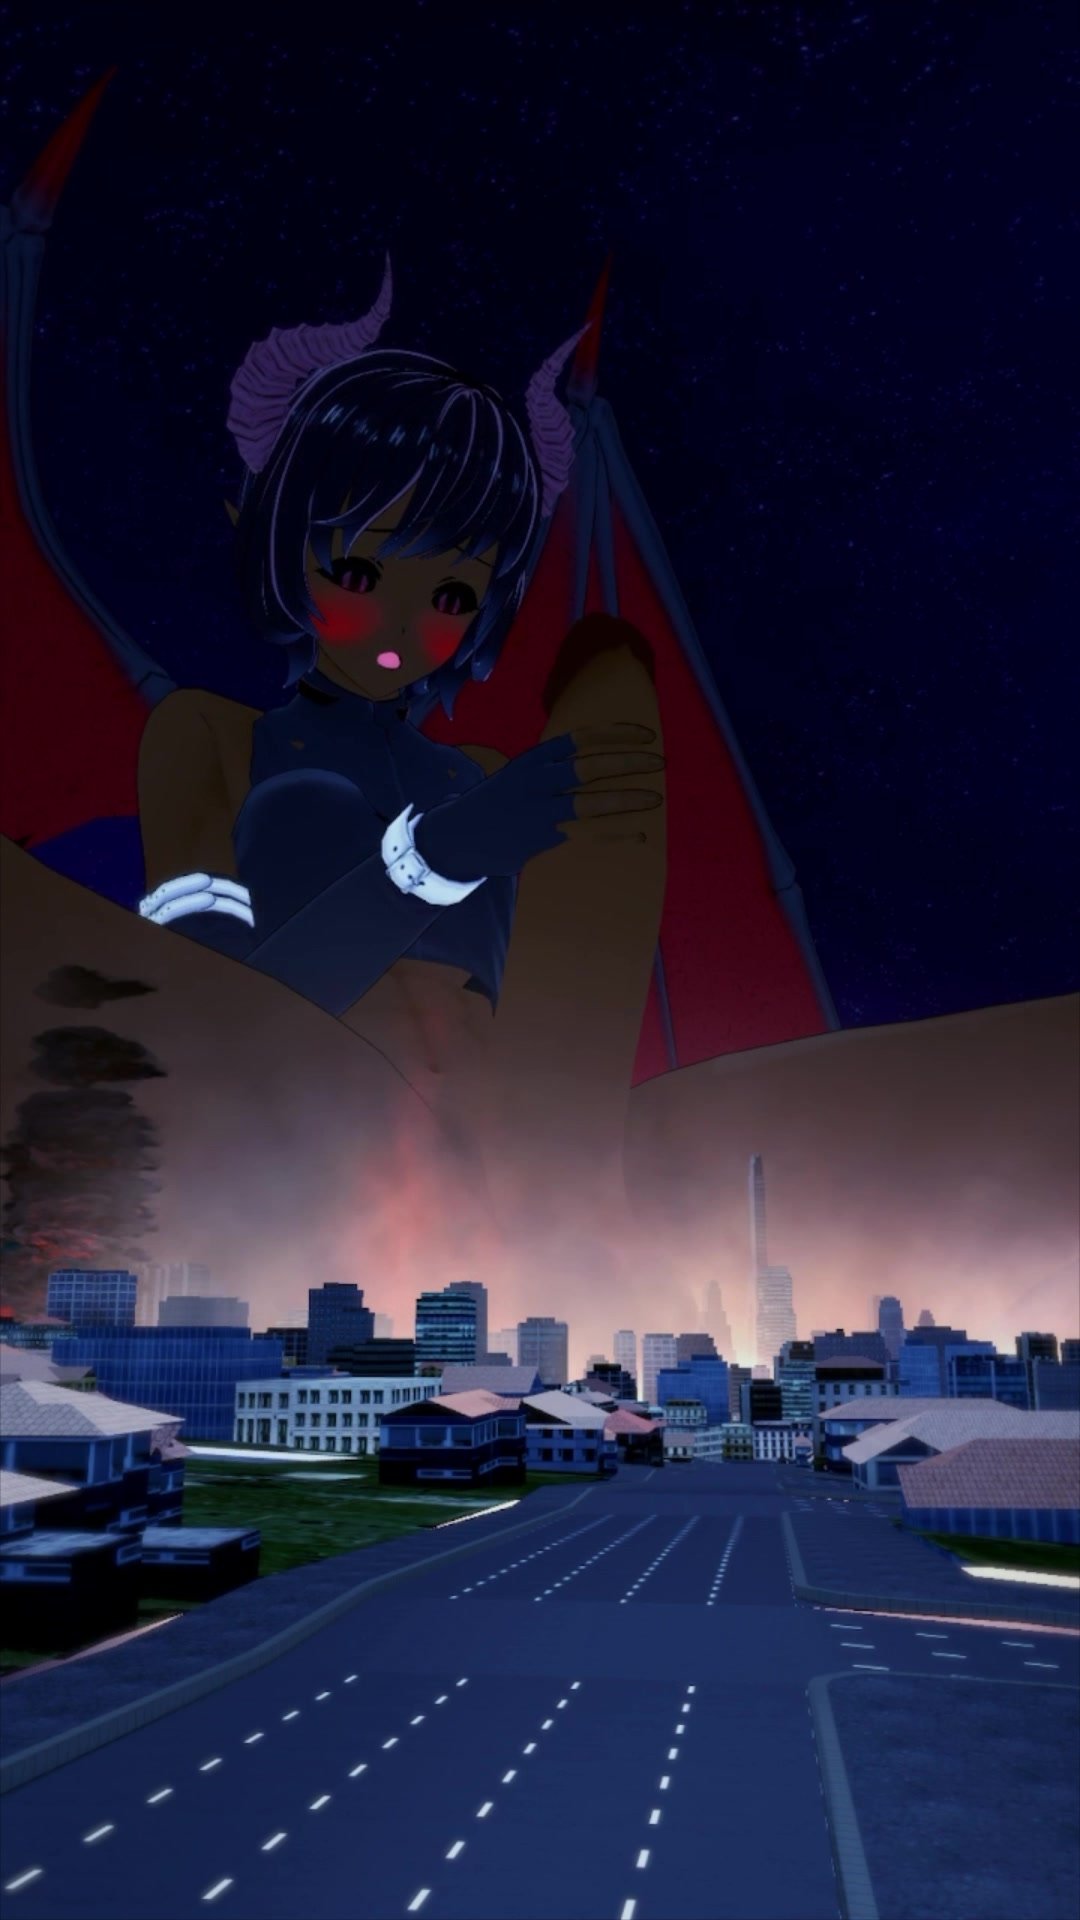 Femboy Succubus pleasures over the destroyed city